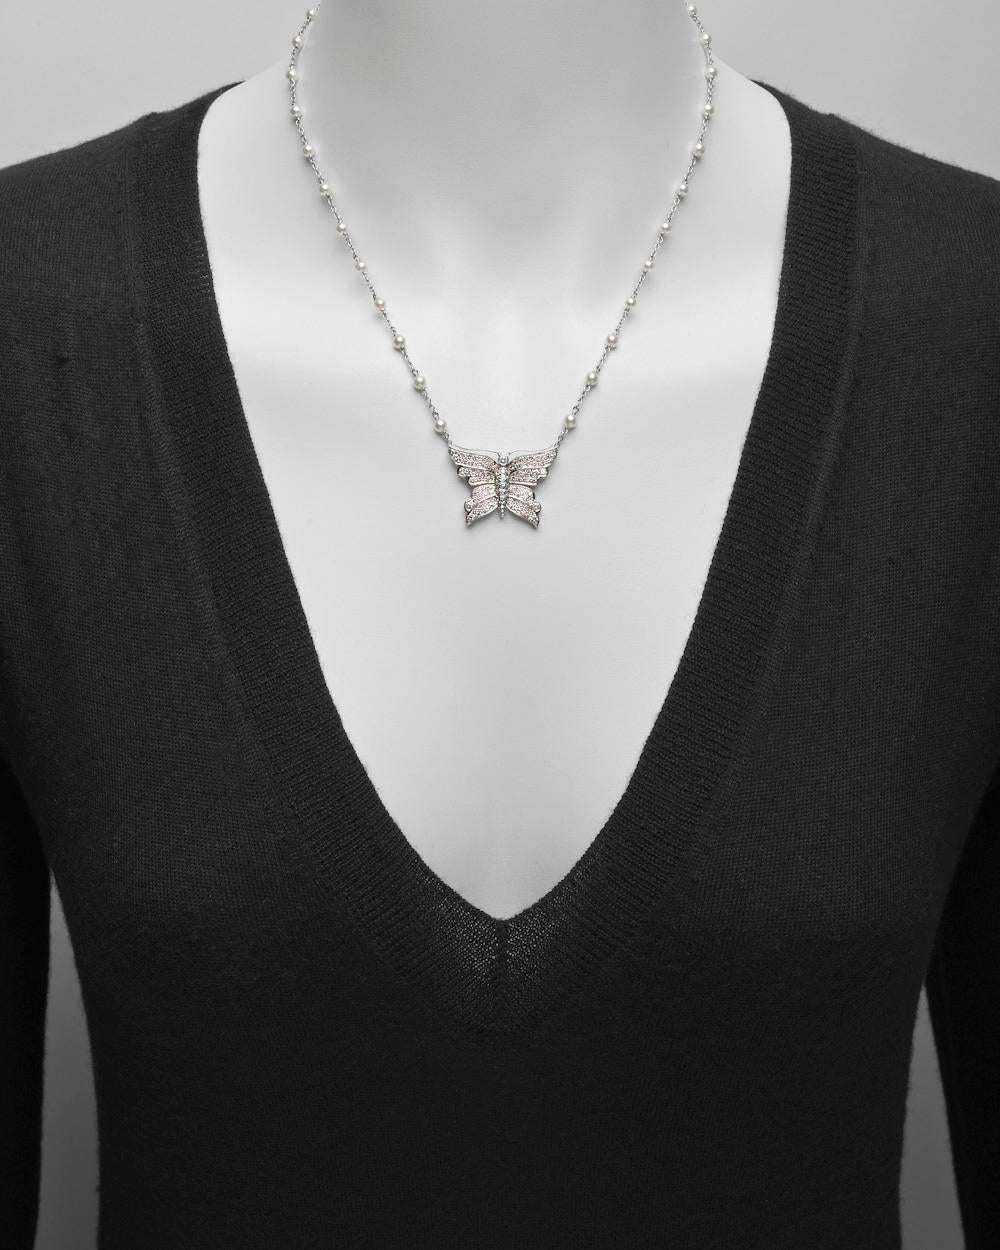 Butterfly pendant necklace, with natural light pink diamond-set wings and a white diamond-set body, in platinum, the pendant suspended from a 18" platinum chain necklace with round cultured pearl stations, signed Tiffany & Co. 72 pink